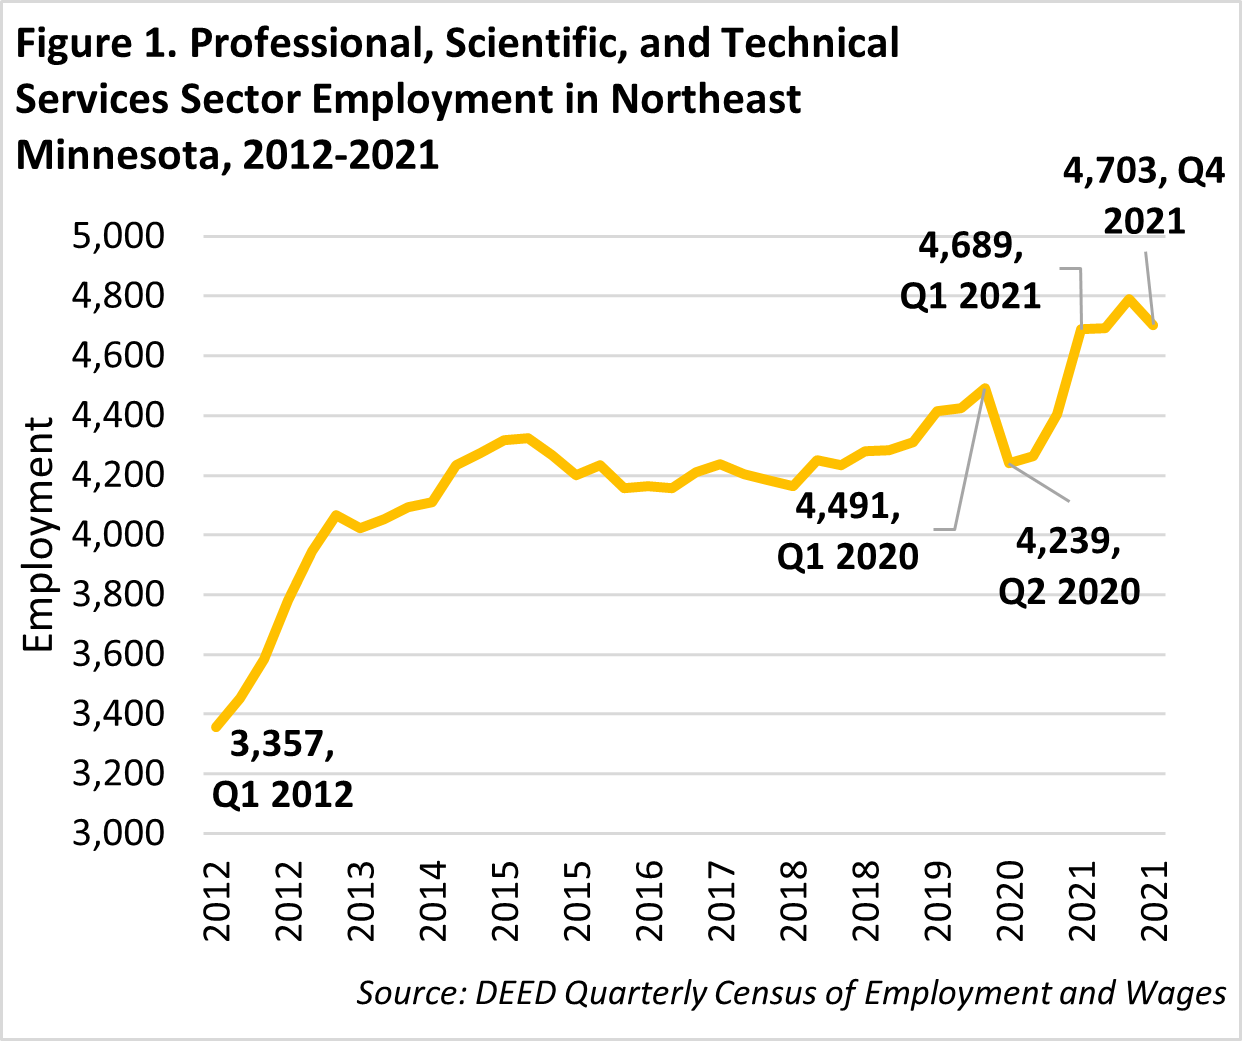 Professional, Scientific, and Technical Services Sector Employment in Northeast Minnesota, 2012-2021 